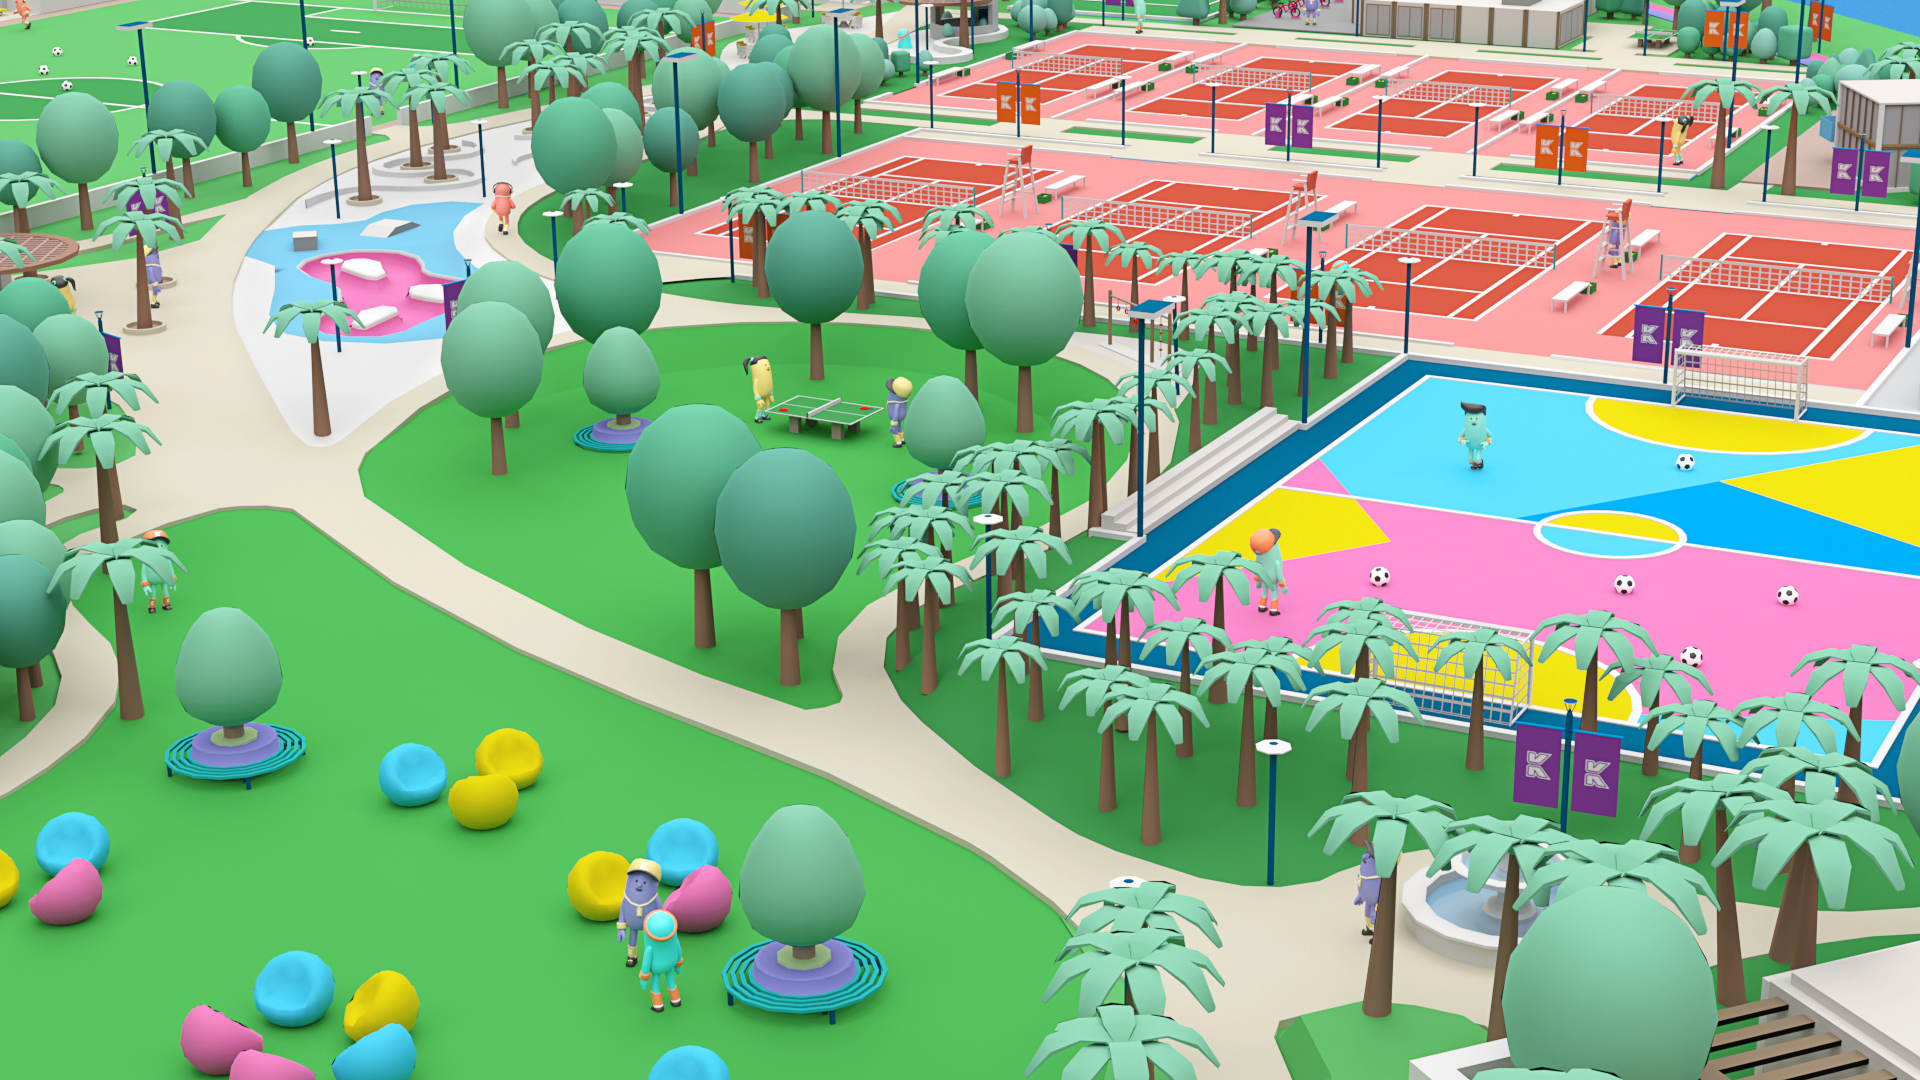 KODE Sports Club by Merci-Michel wins Site of the Month November 2020